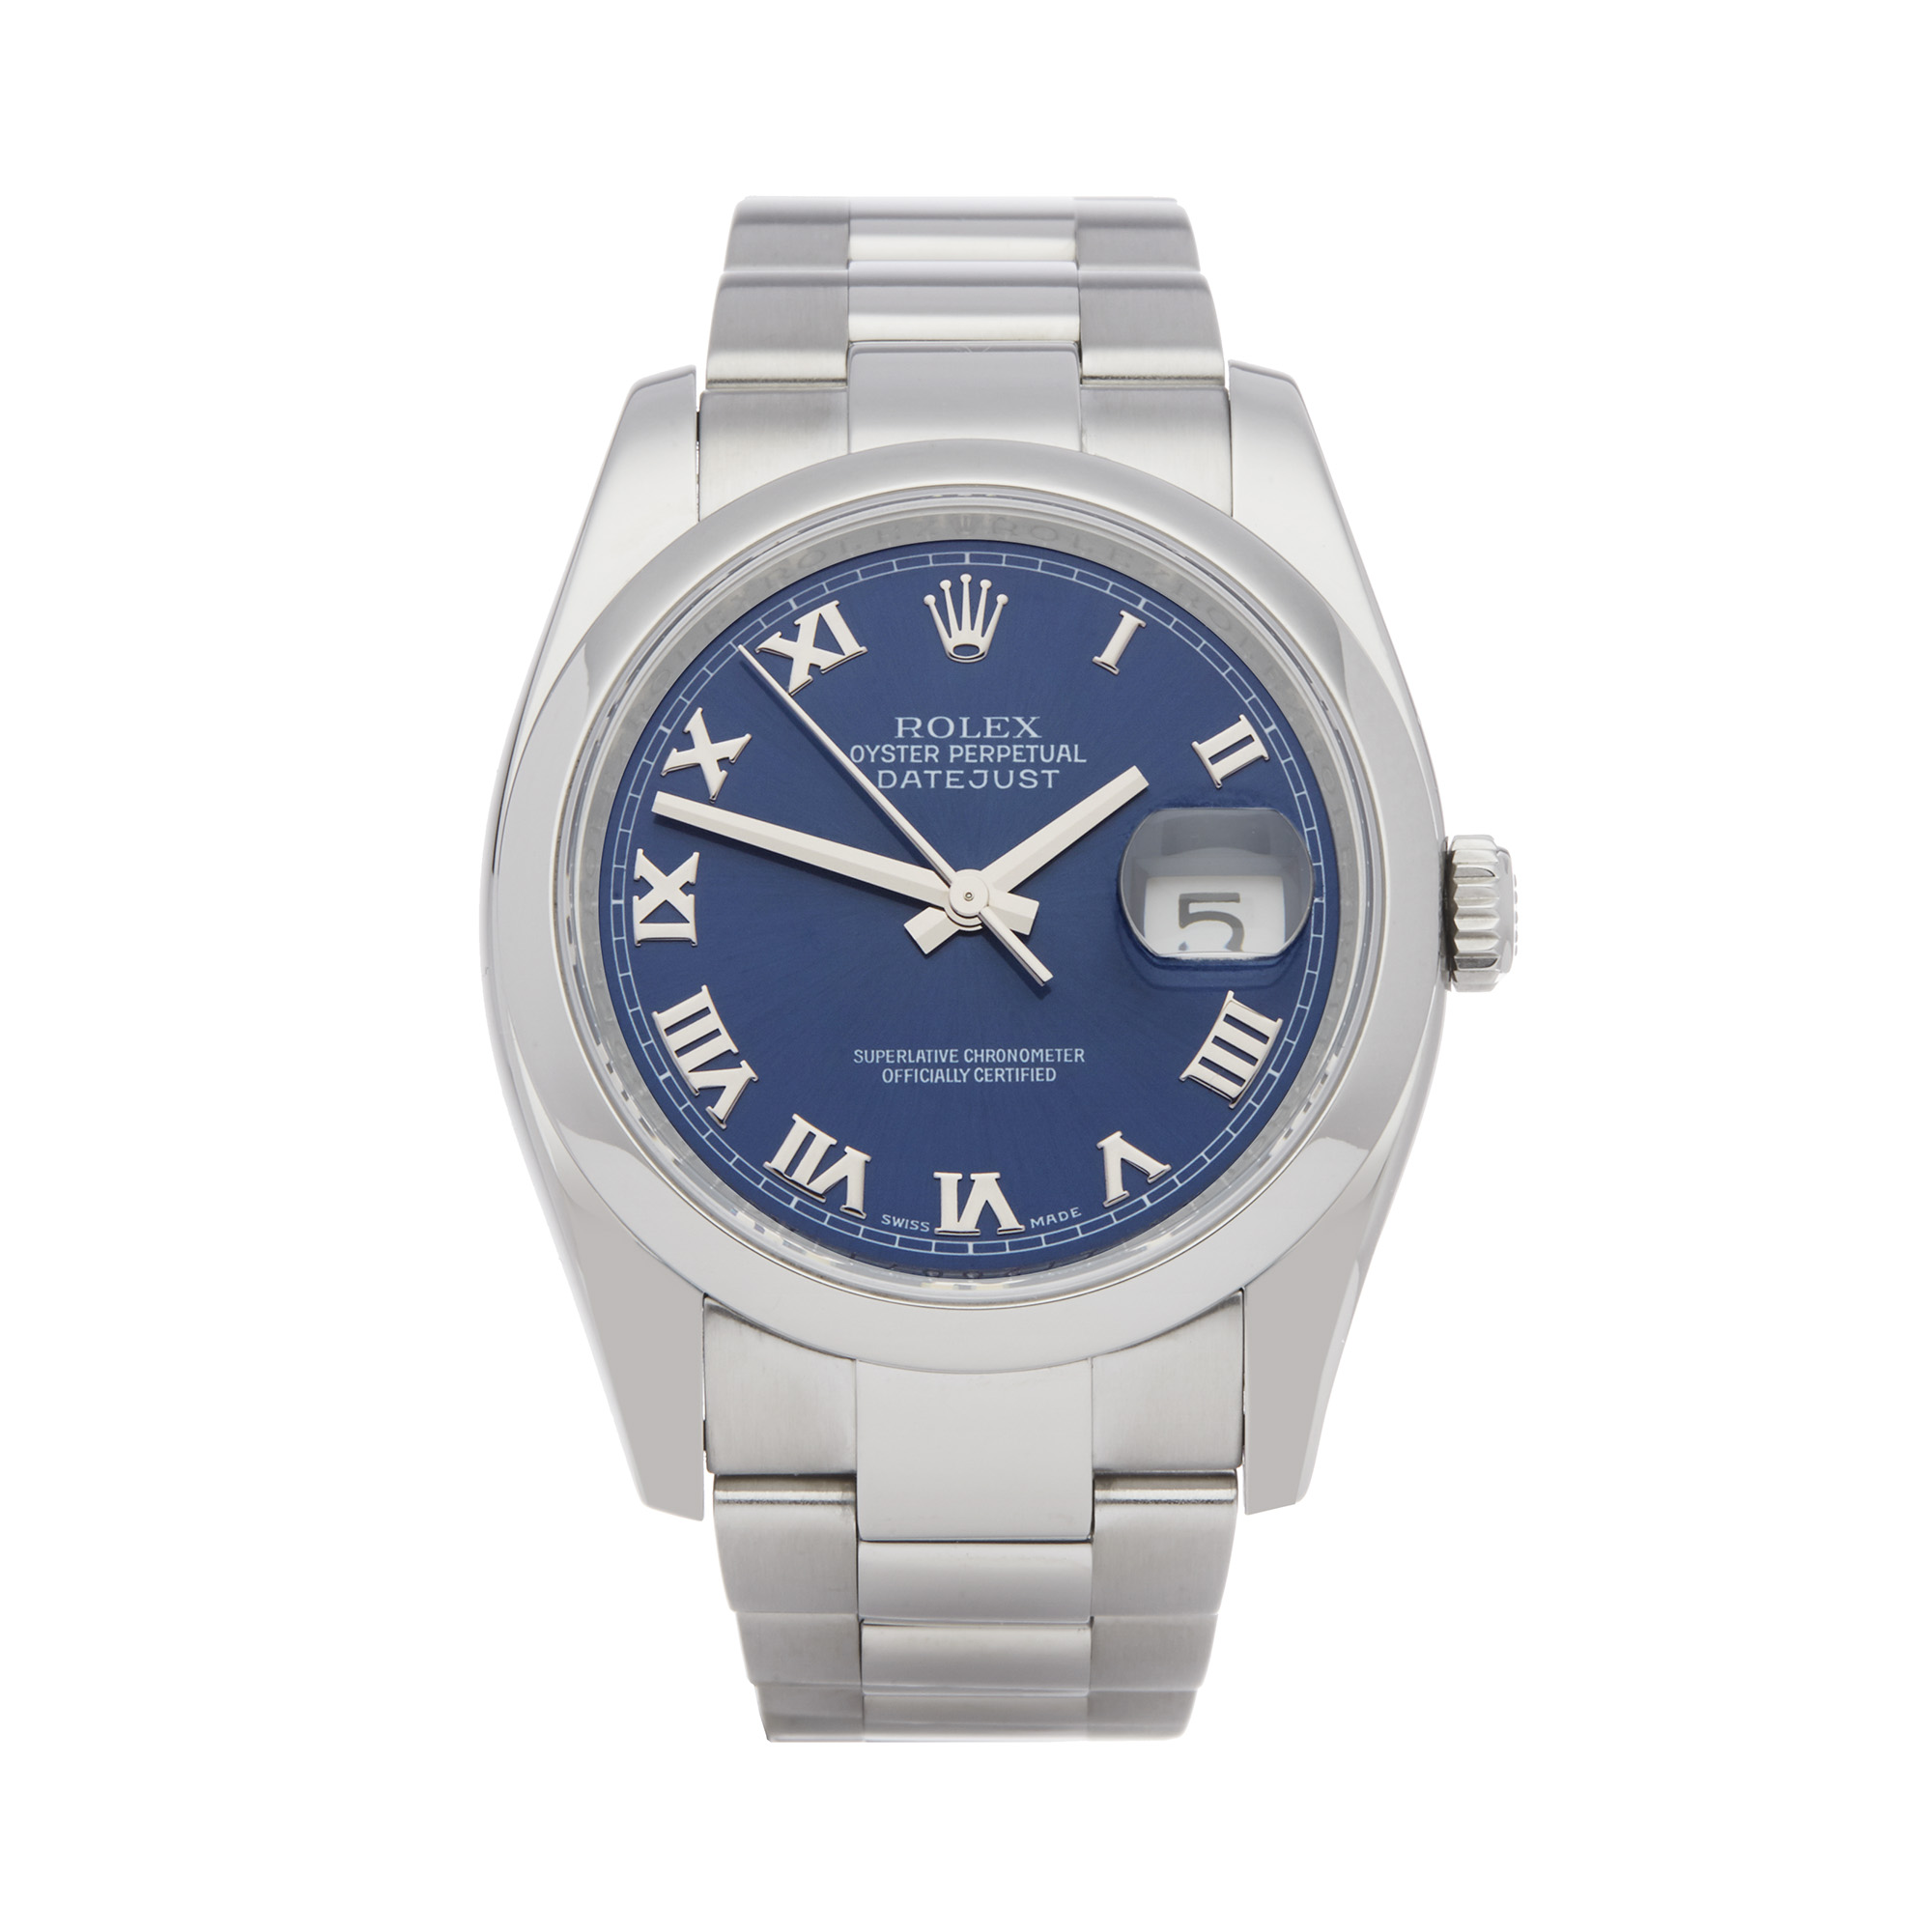 Rolex Datejust 36 116200 Men Stainless Steel Watch - Image 9 of 9